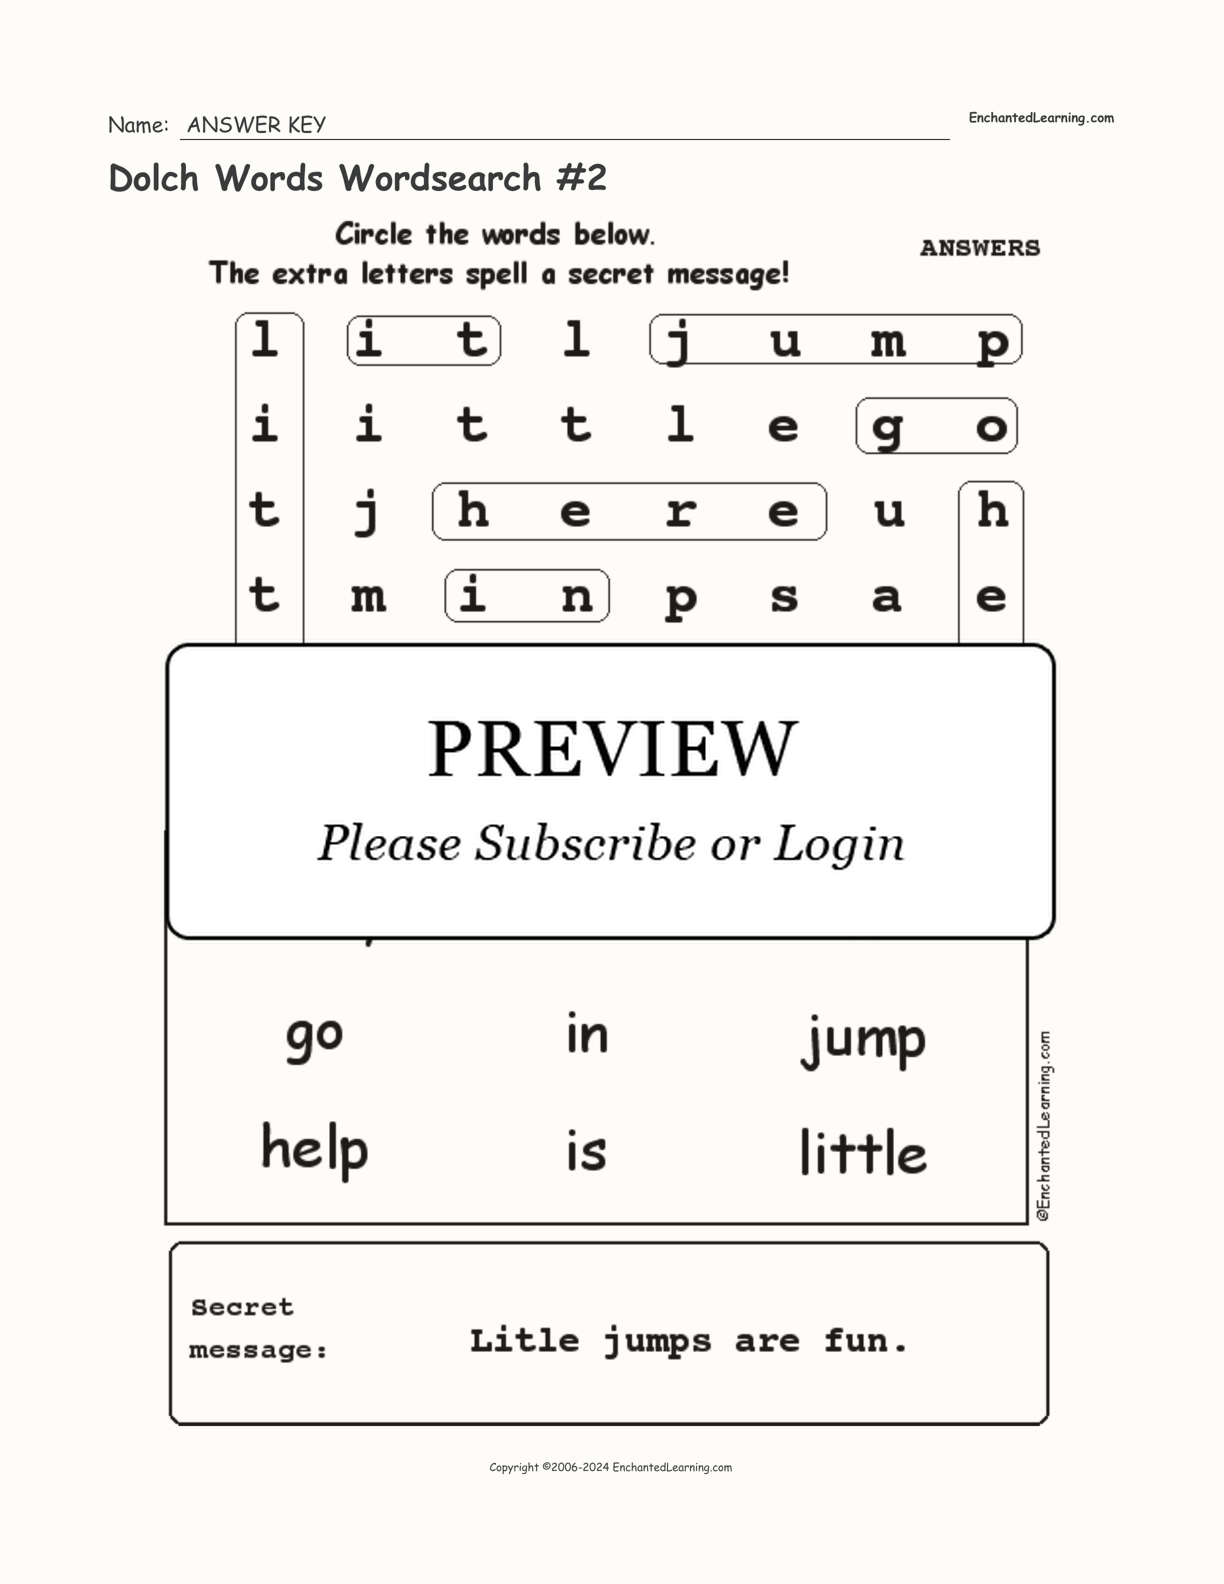 Dolch Words Wordsearch #2 interactive worksheet page 2